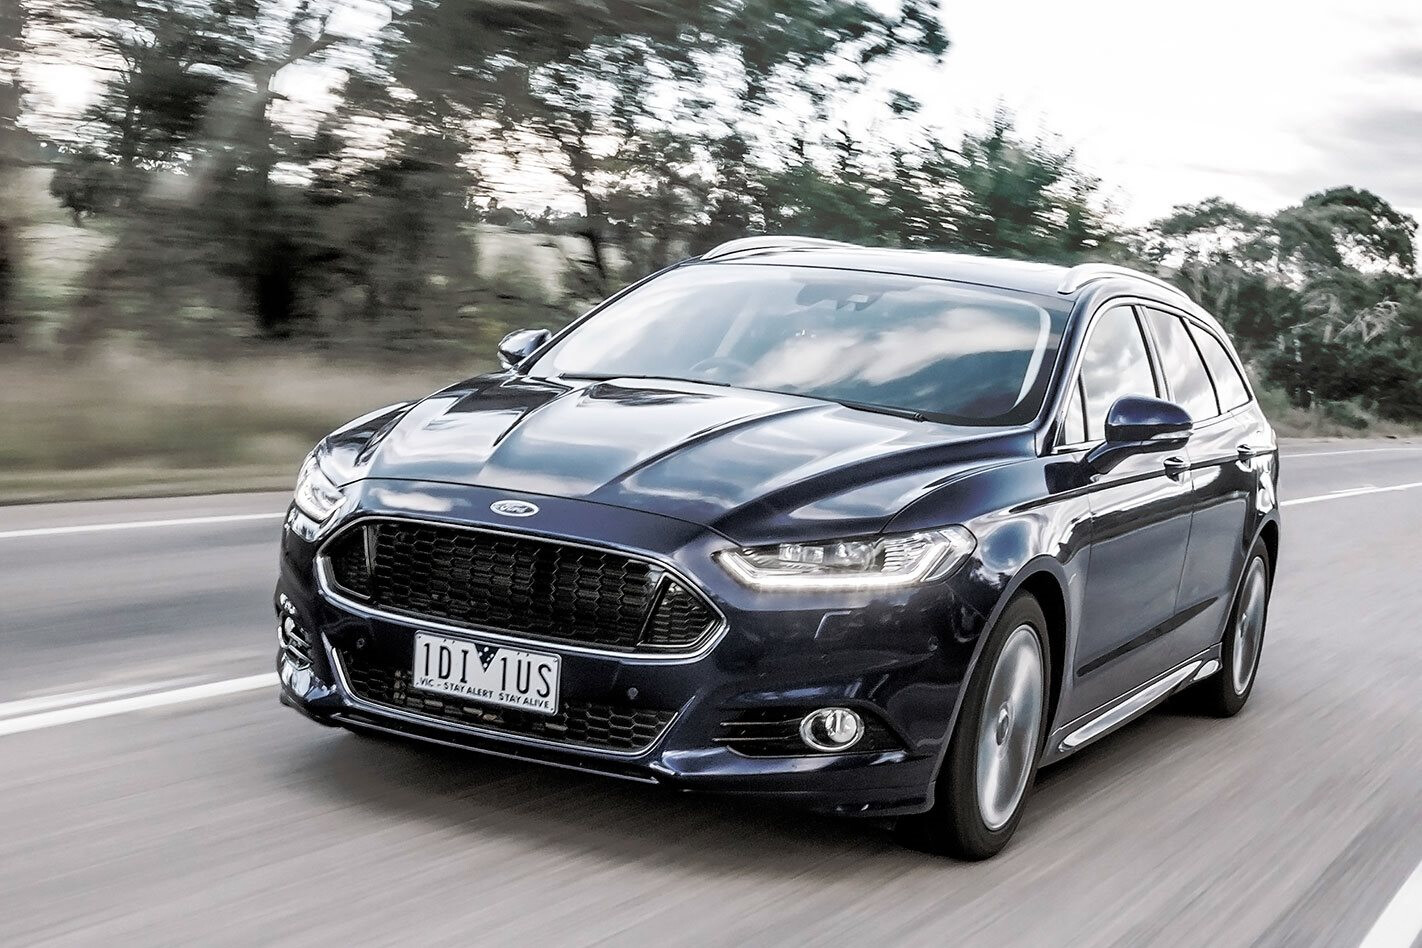 essence Duplicatie dwaas Ford Mondeo 2018 Review, Price & Features